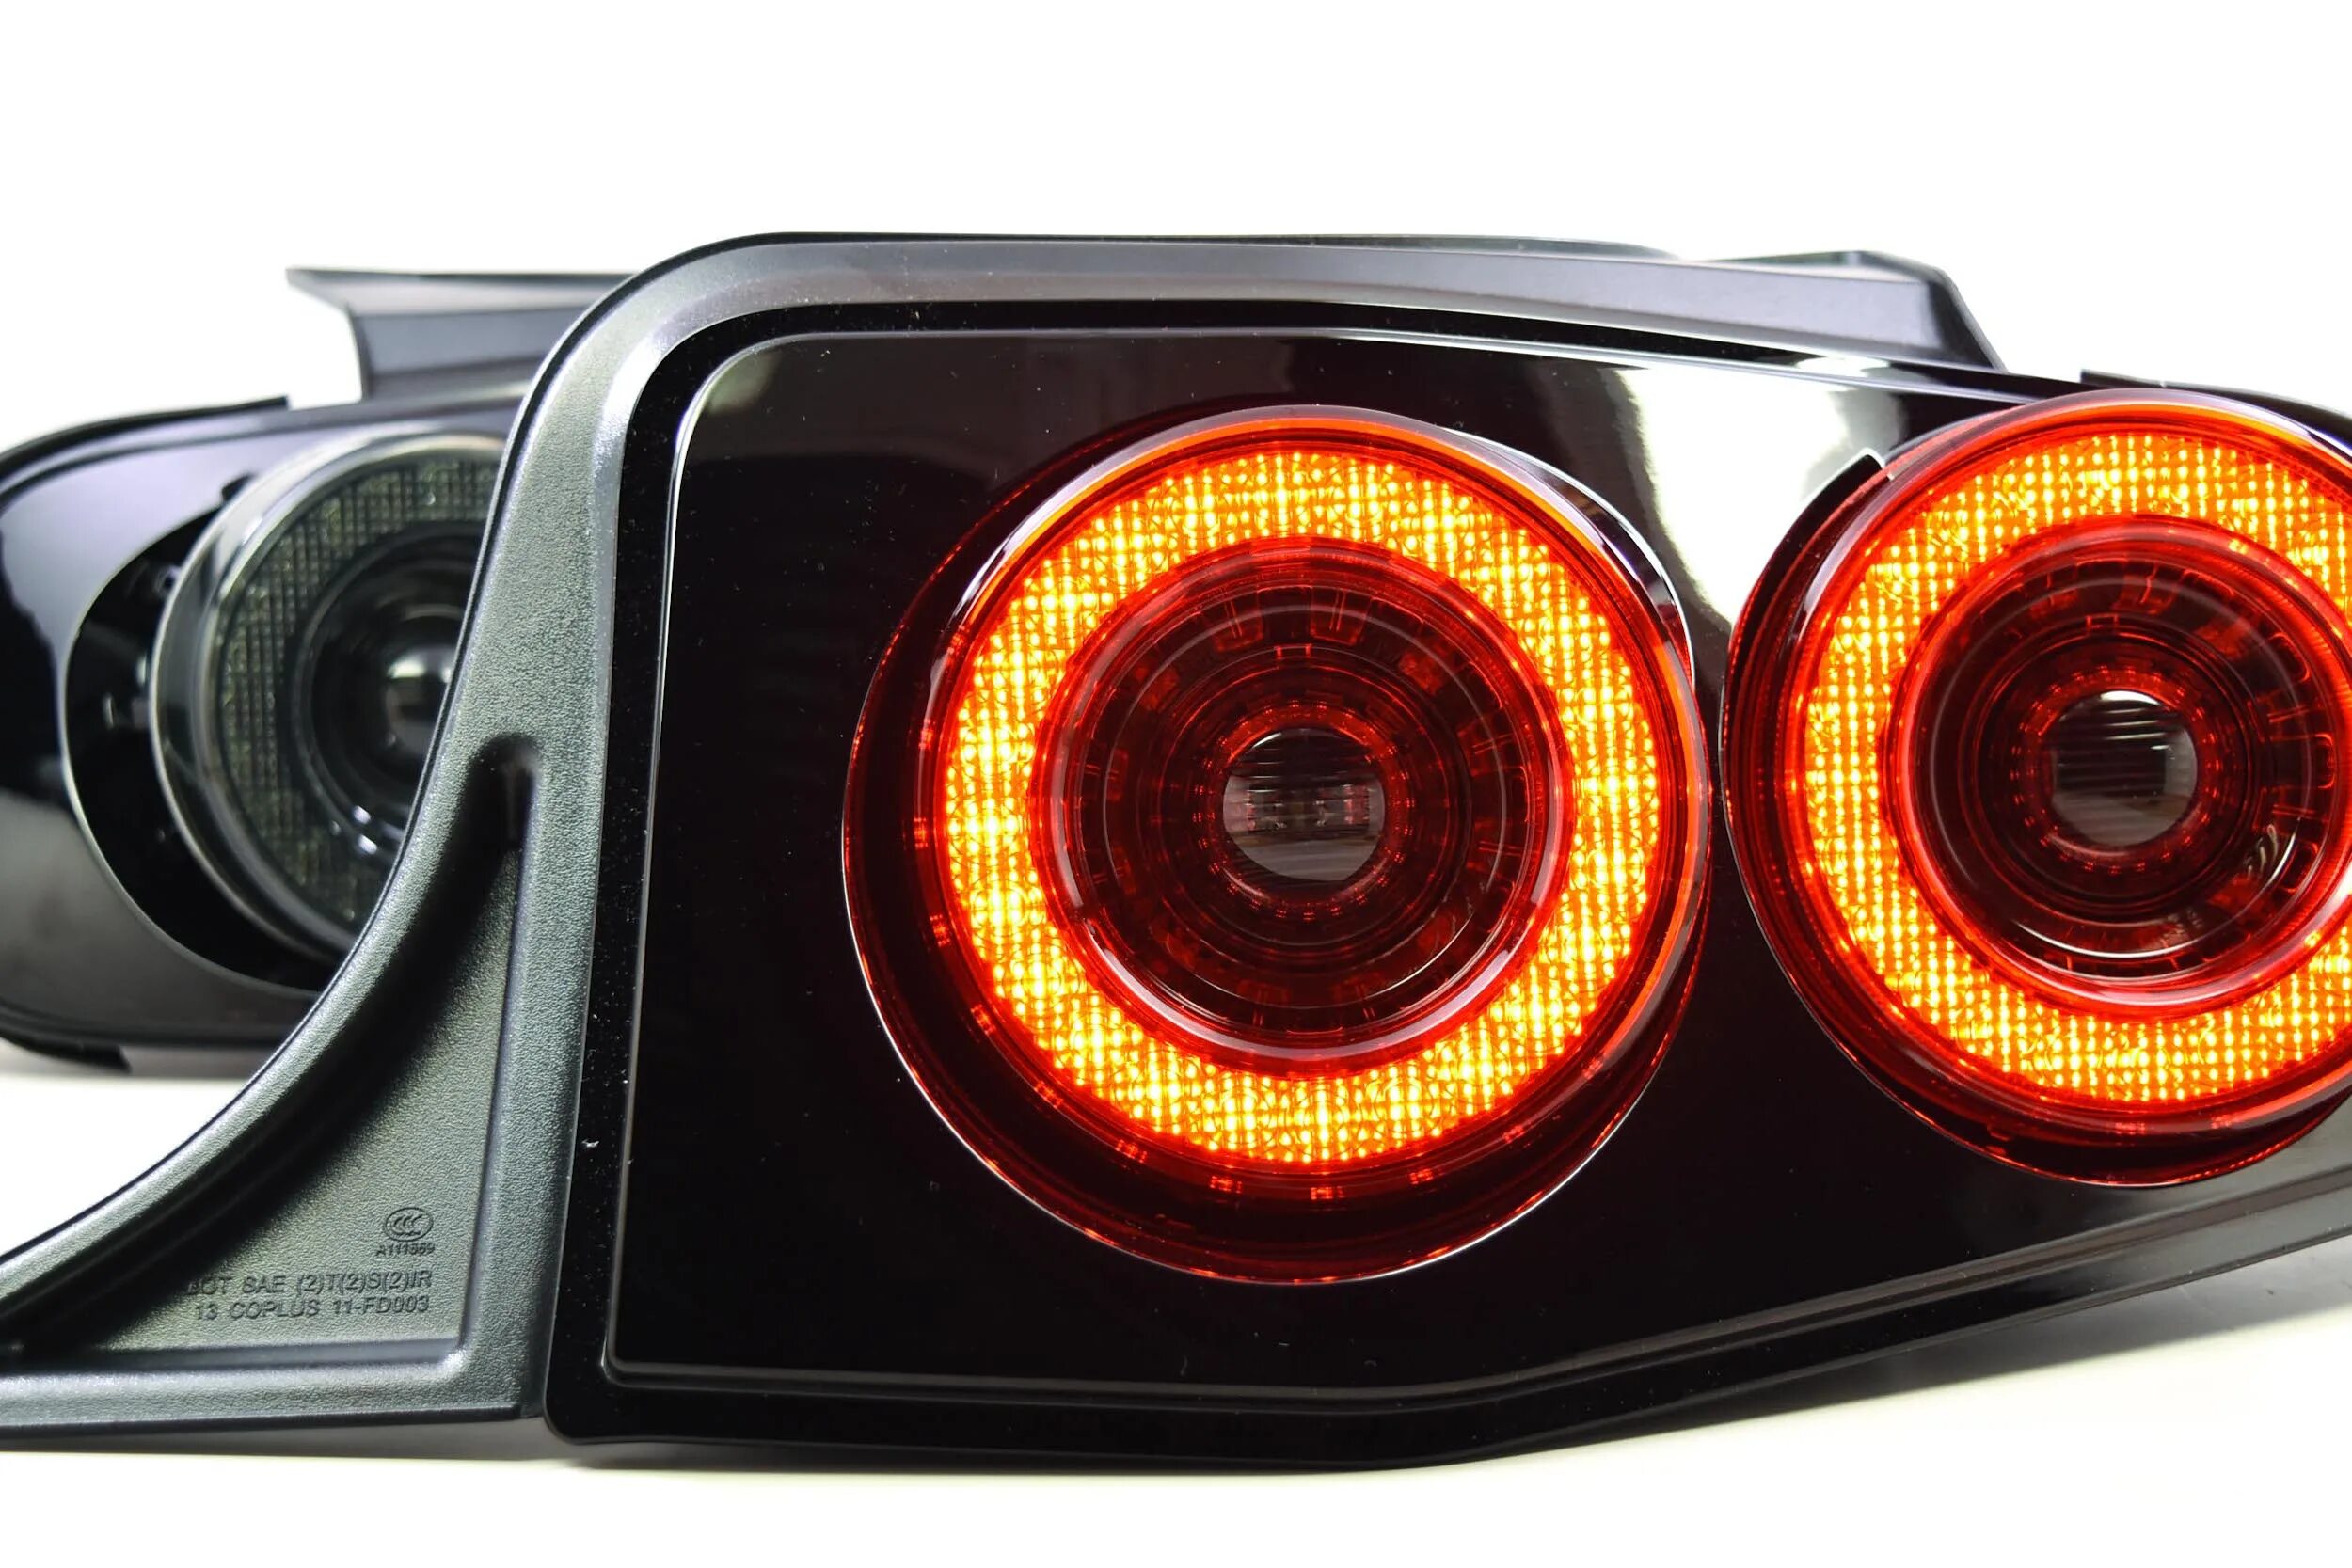 Мустанг фары. Ford Mustang: Morimoto XB led taillights. Задние фонари Ford Mustang. Задние фонари Форд Мустанг. Ford Mustang Tail Lights.